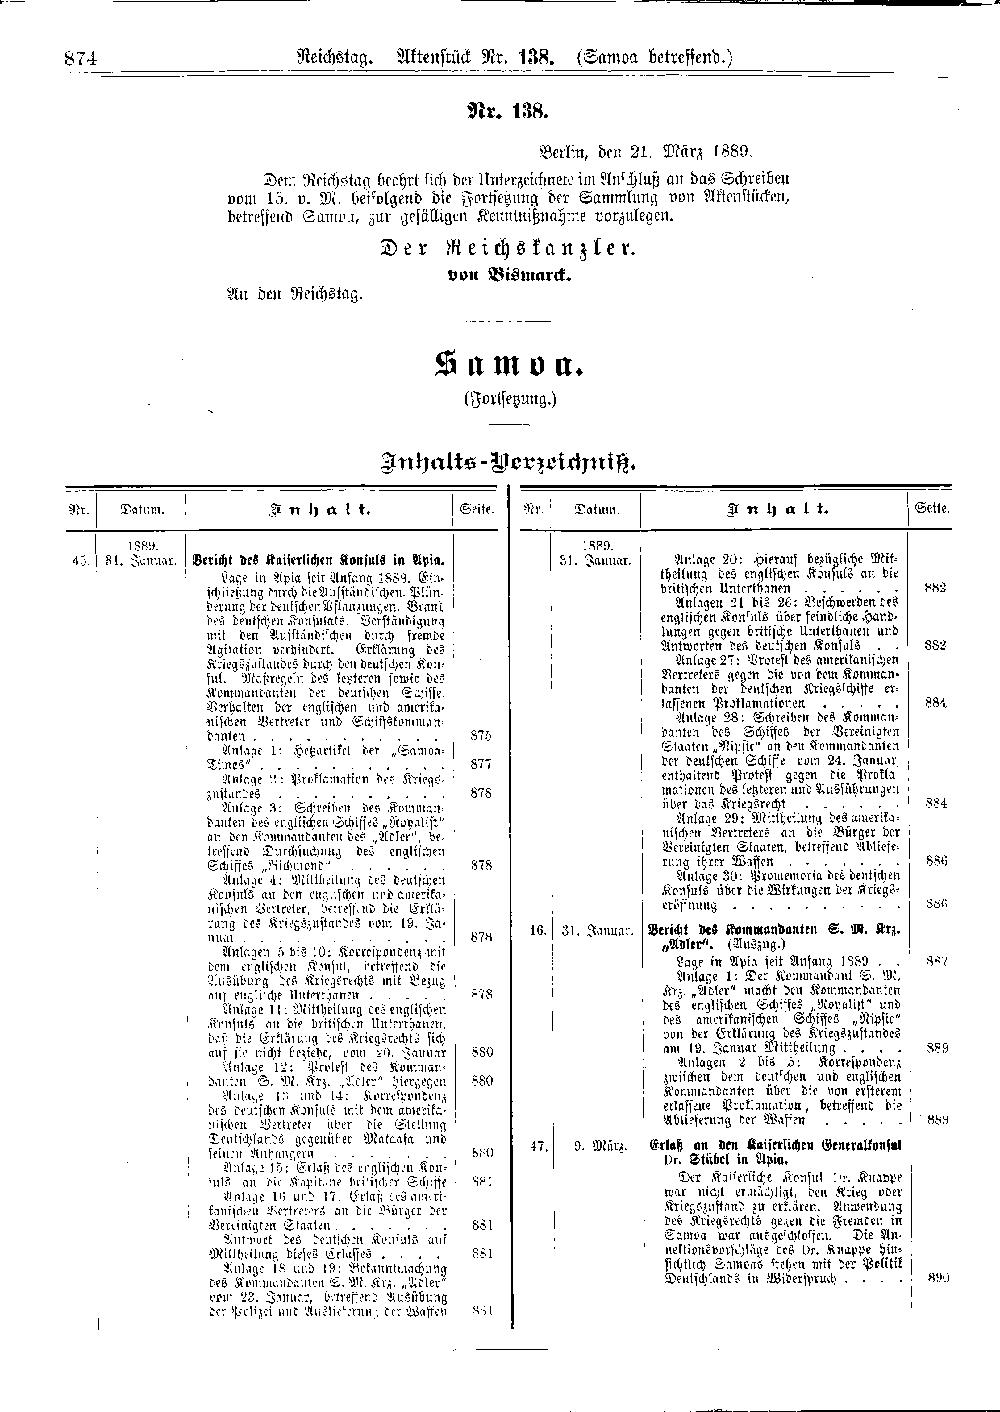 Scan of page 874